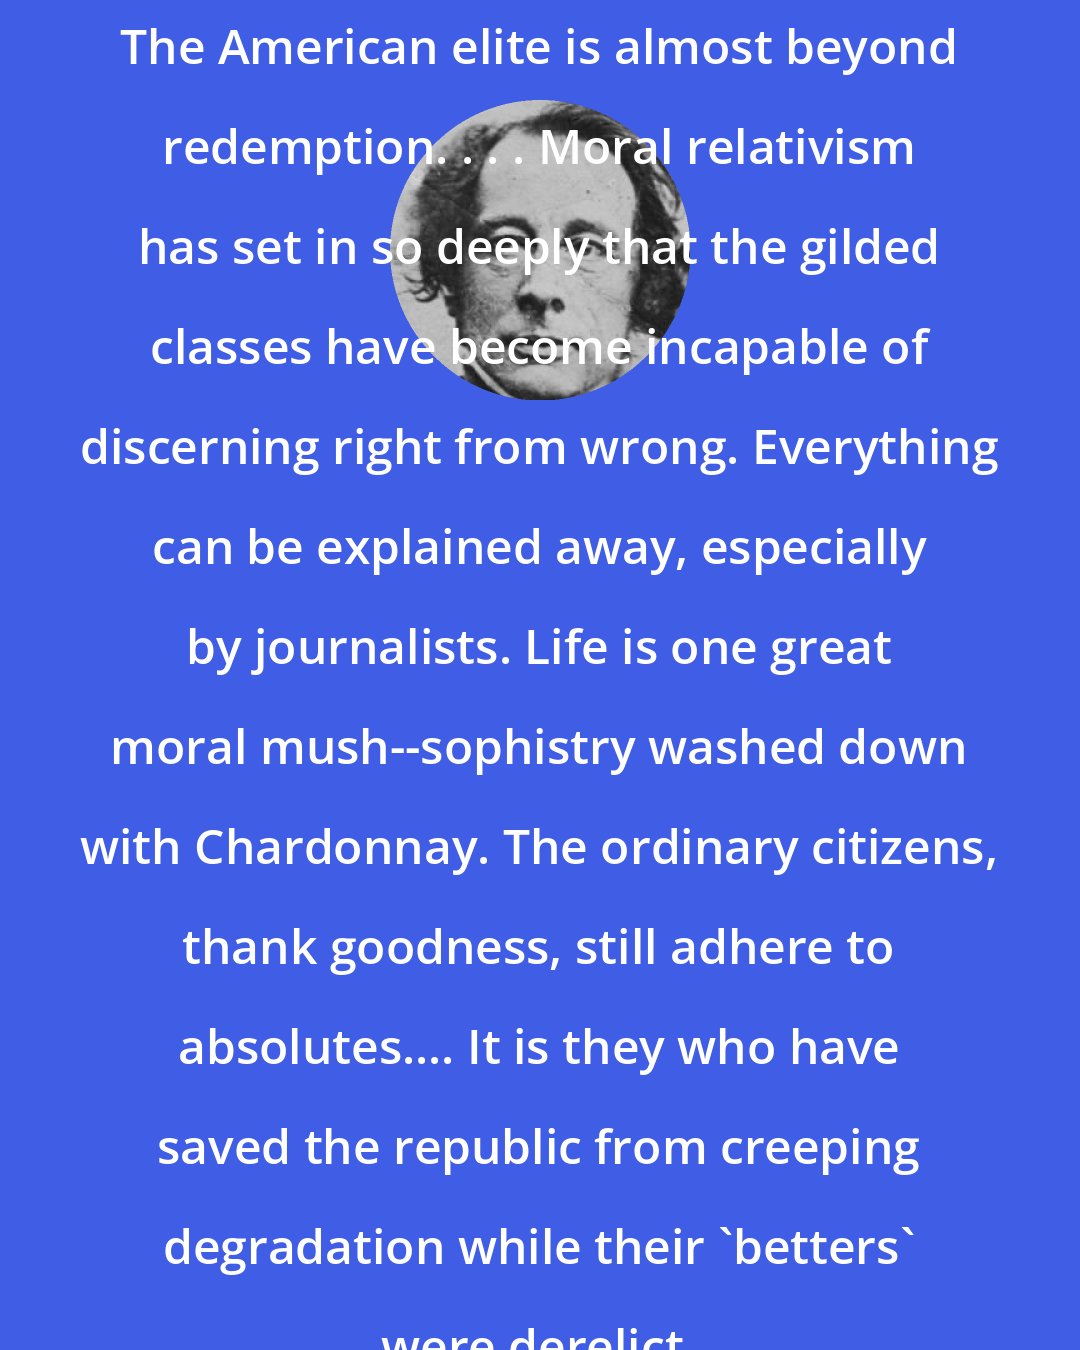 Charles Dickens: The American elite is almost beyond redemption. . . . Moral relativism has set in so deeply that the gilded classes have become incapable of discerning right from wrong. Everything can be explained away, especially by journalists. Life is one great moral mush--sophistry washed down with Chardonnay. The ordinary citizens, thank goodness, still adhere to absolutes.... It is they who have saved the republic from creeping degradation while their 'betters' were derelict.